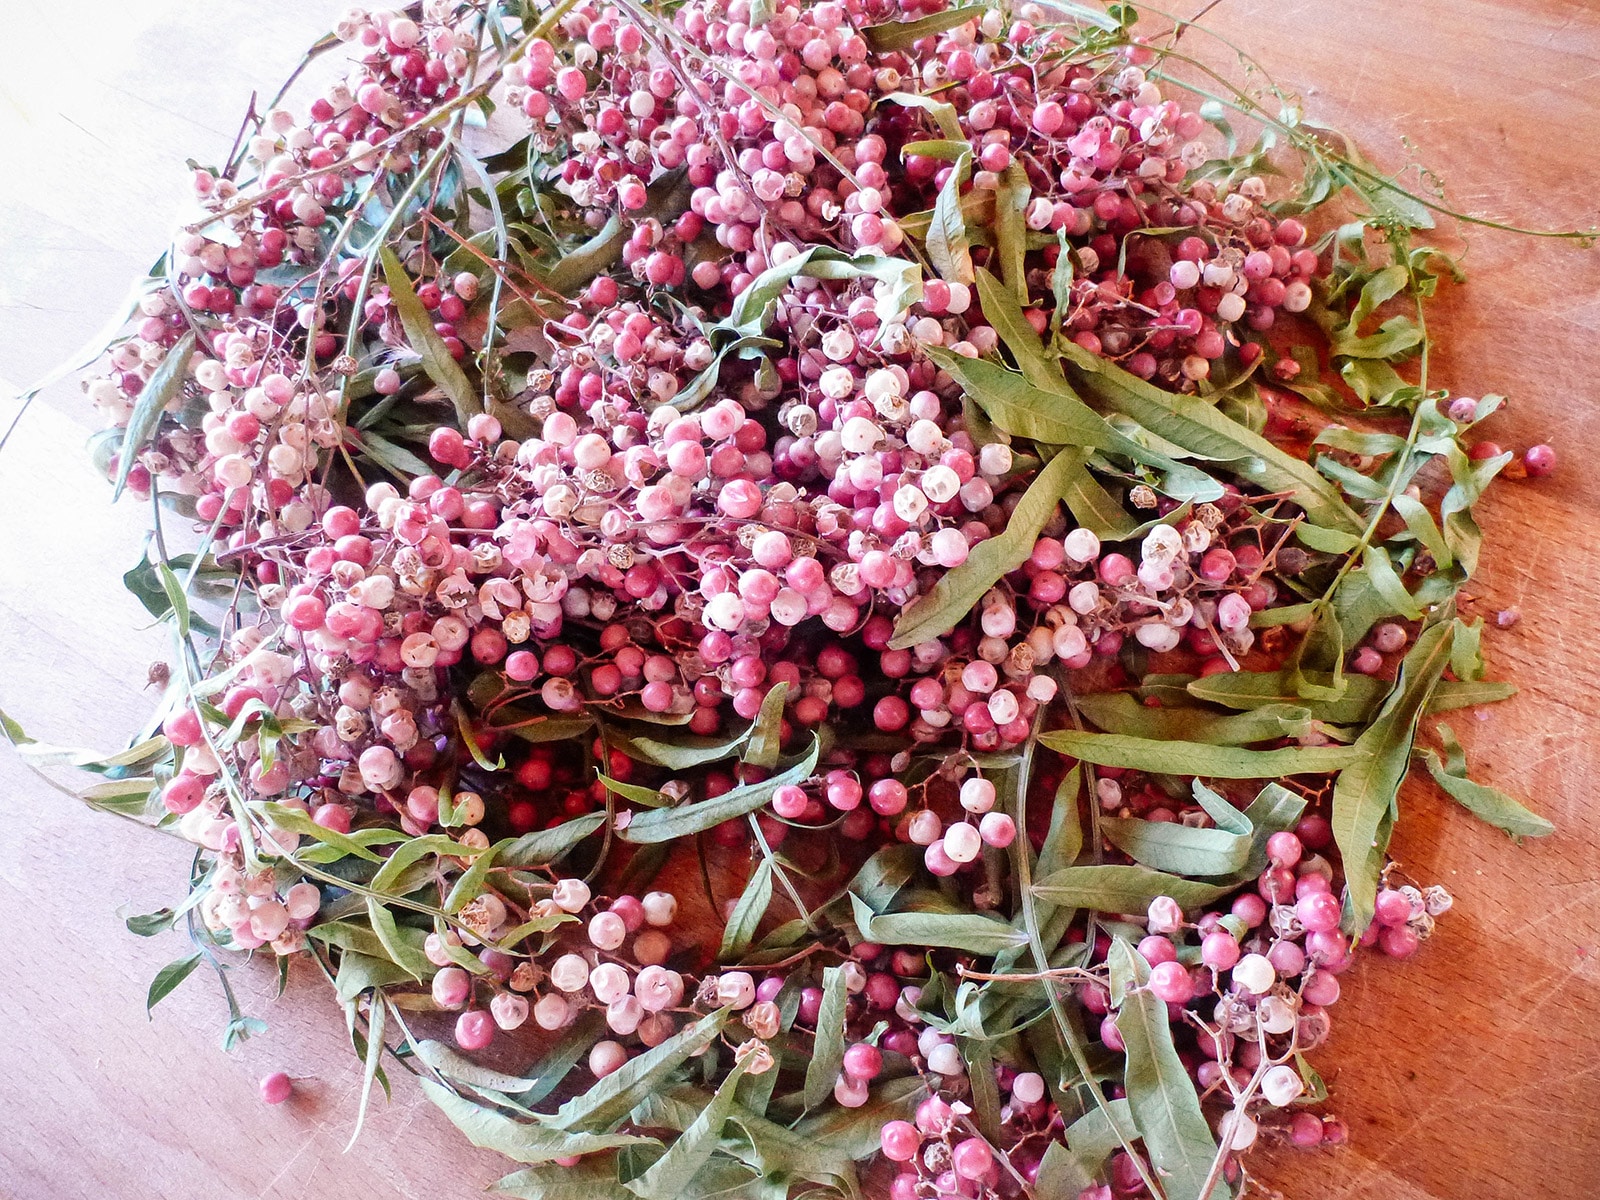 Stems full of ripe Peruvian pepper tree berries on a counter